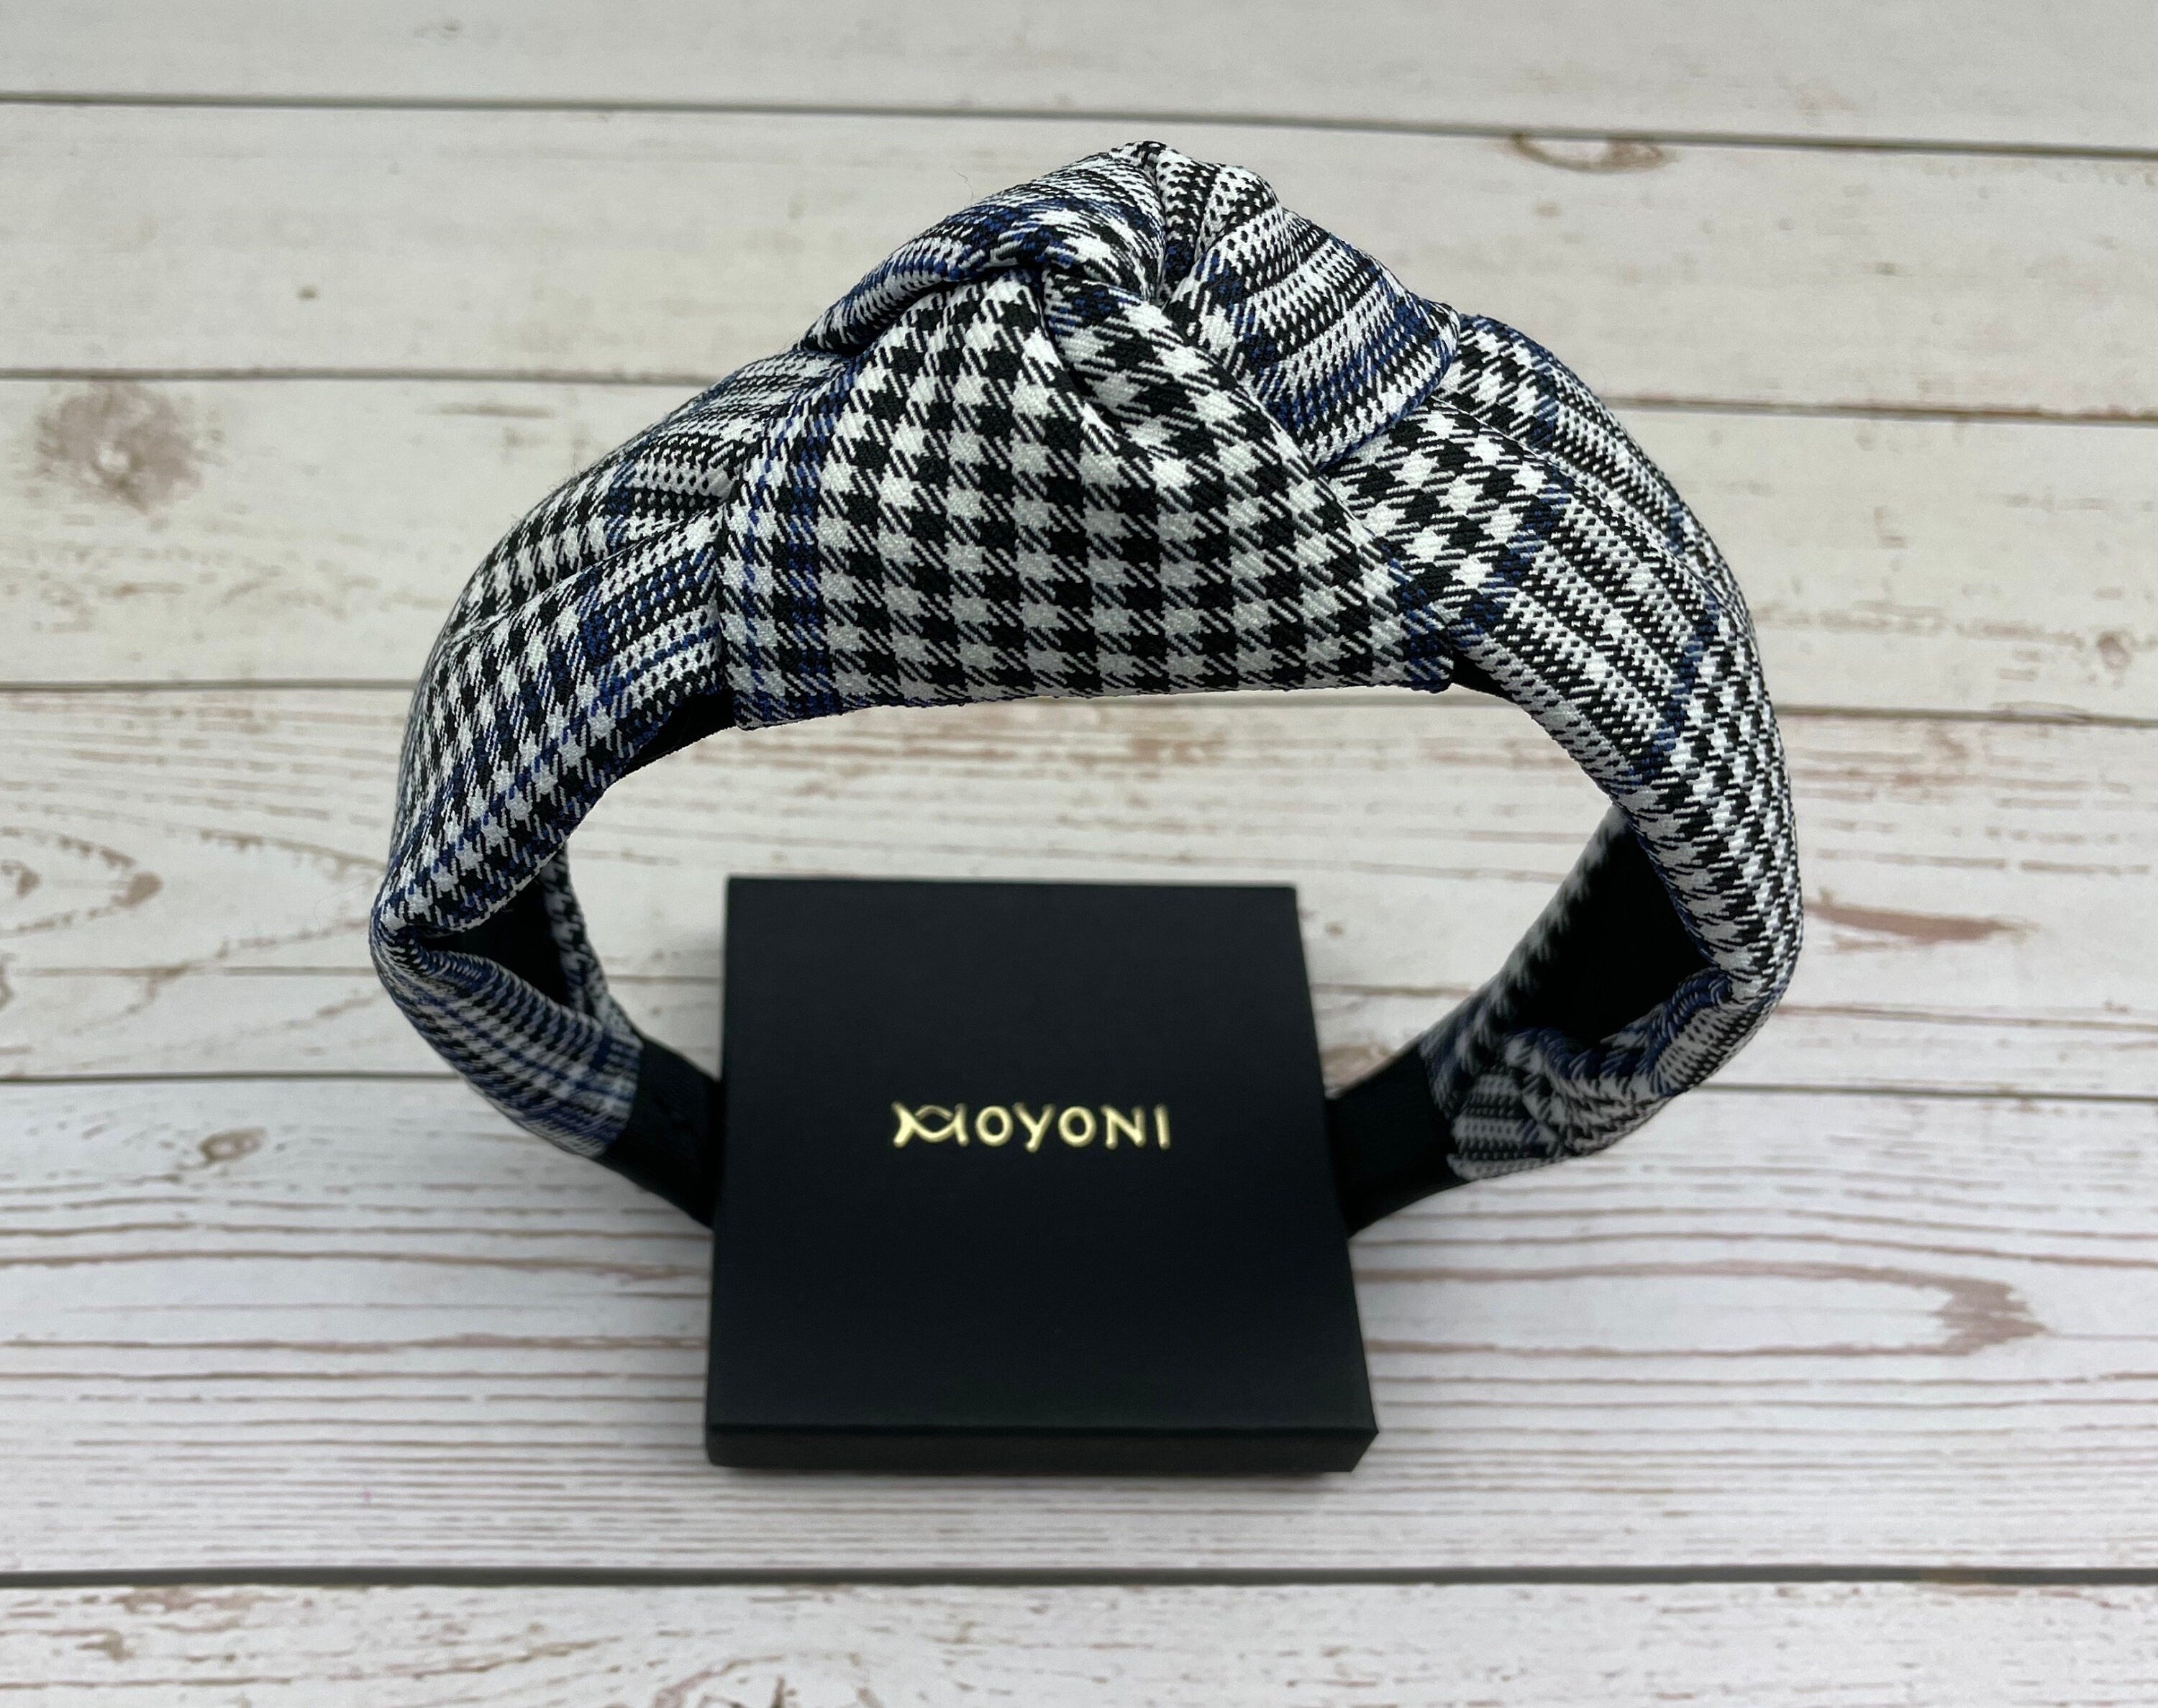 Elevate your fashion game with this knotted headband, ideal for college students and working women.